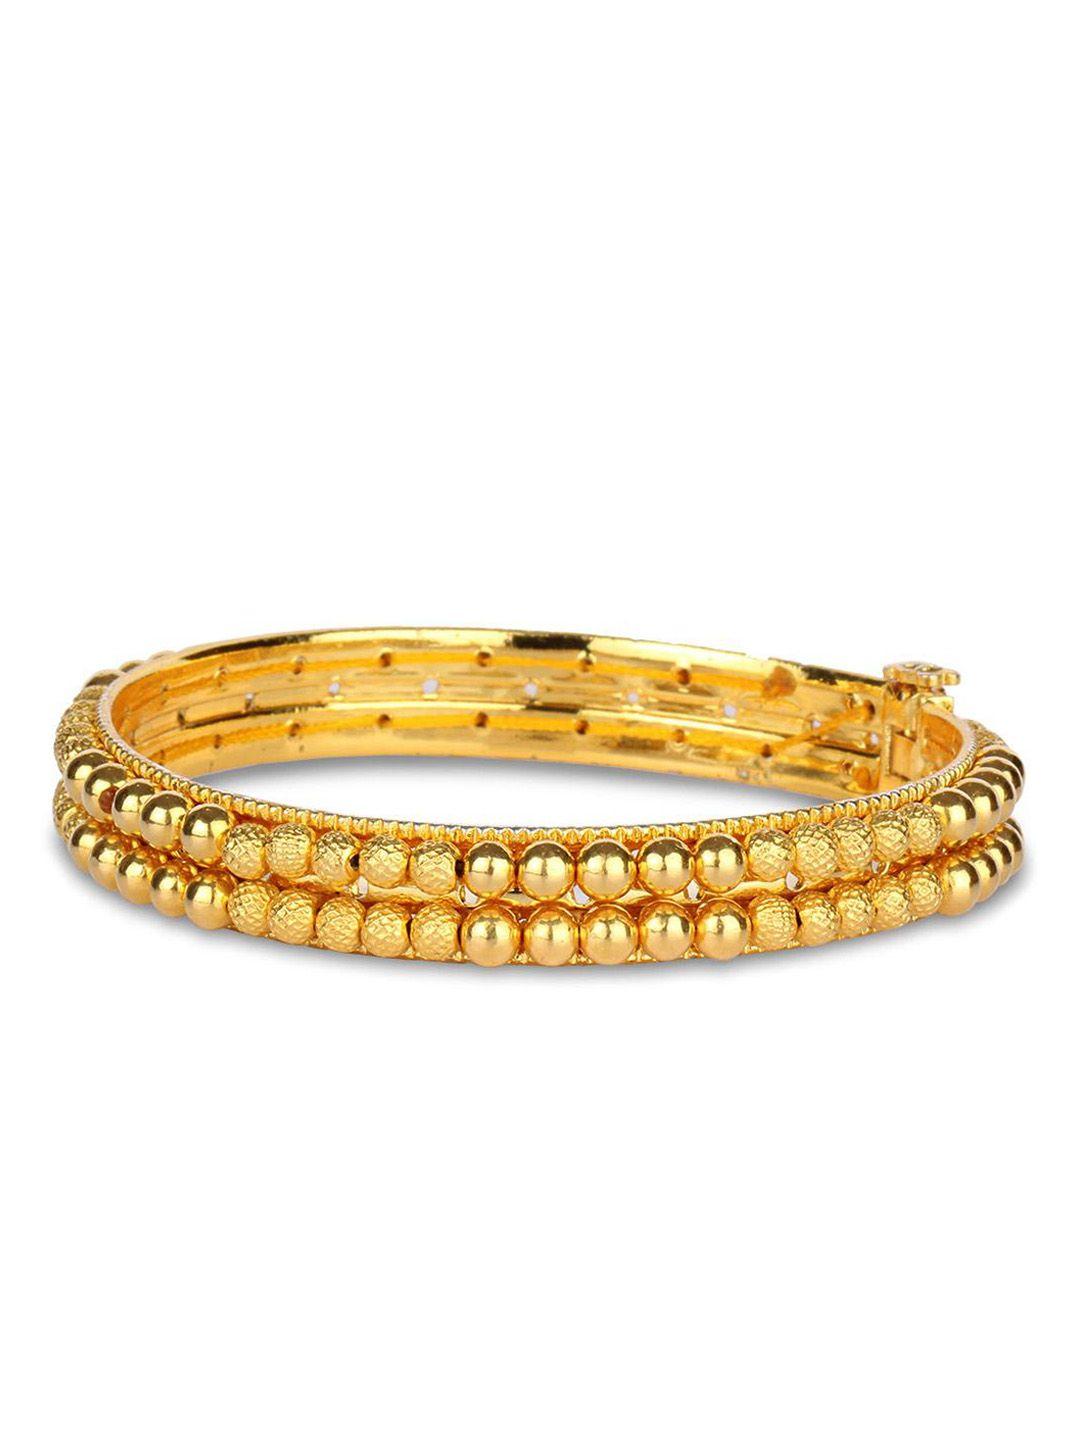 candere a kalyan jewellers company 22kt gold tushi bangle - 2.35 gm